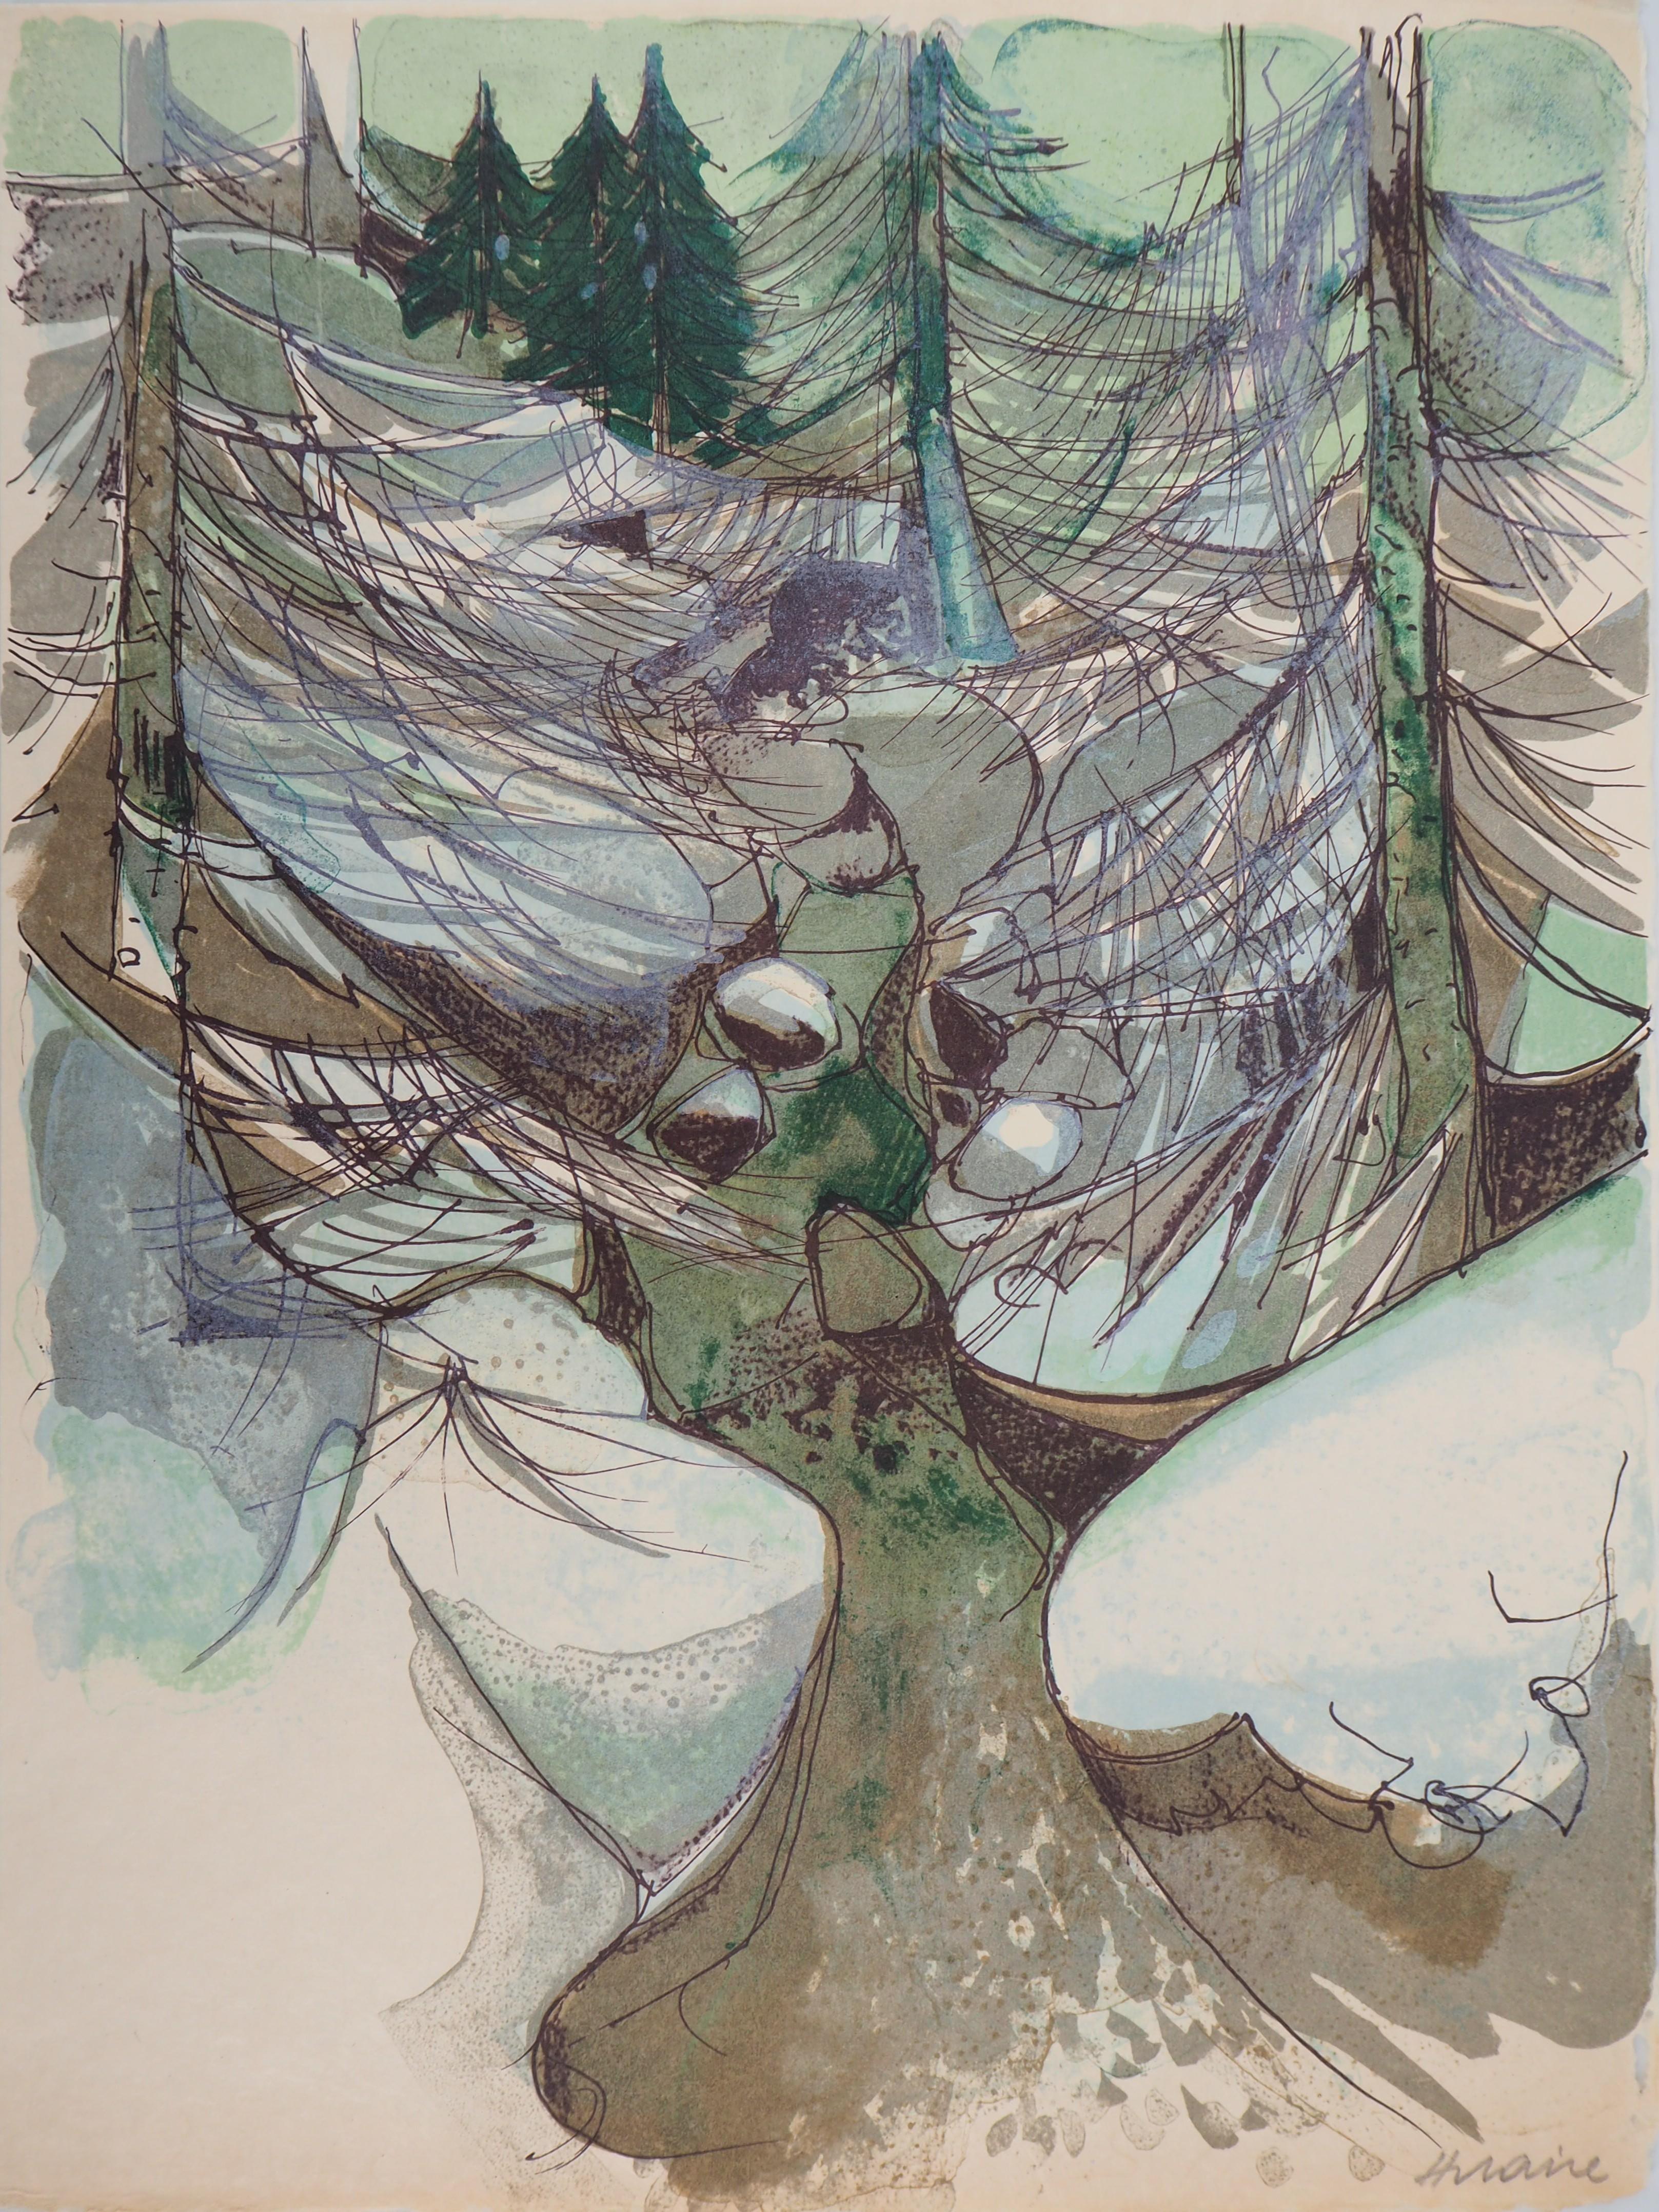 Camille Hilaire Landscape Print – Rivers in France : Mountain Torrent in Winter - Original handsignierte Lithographie